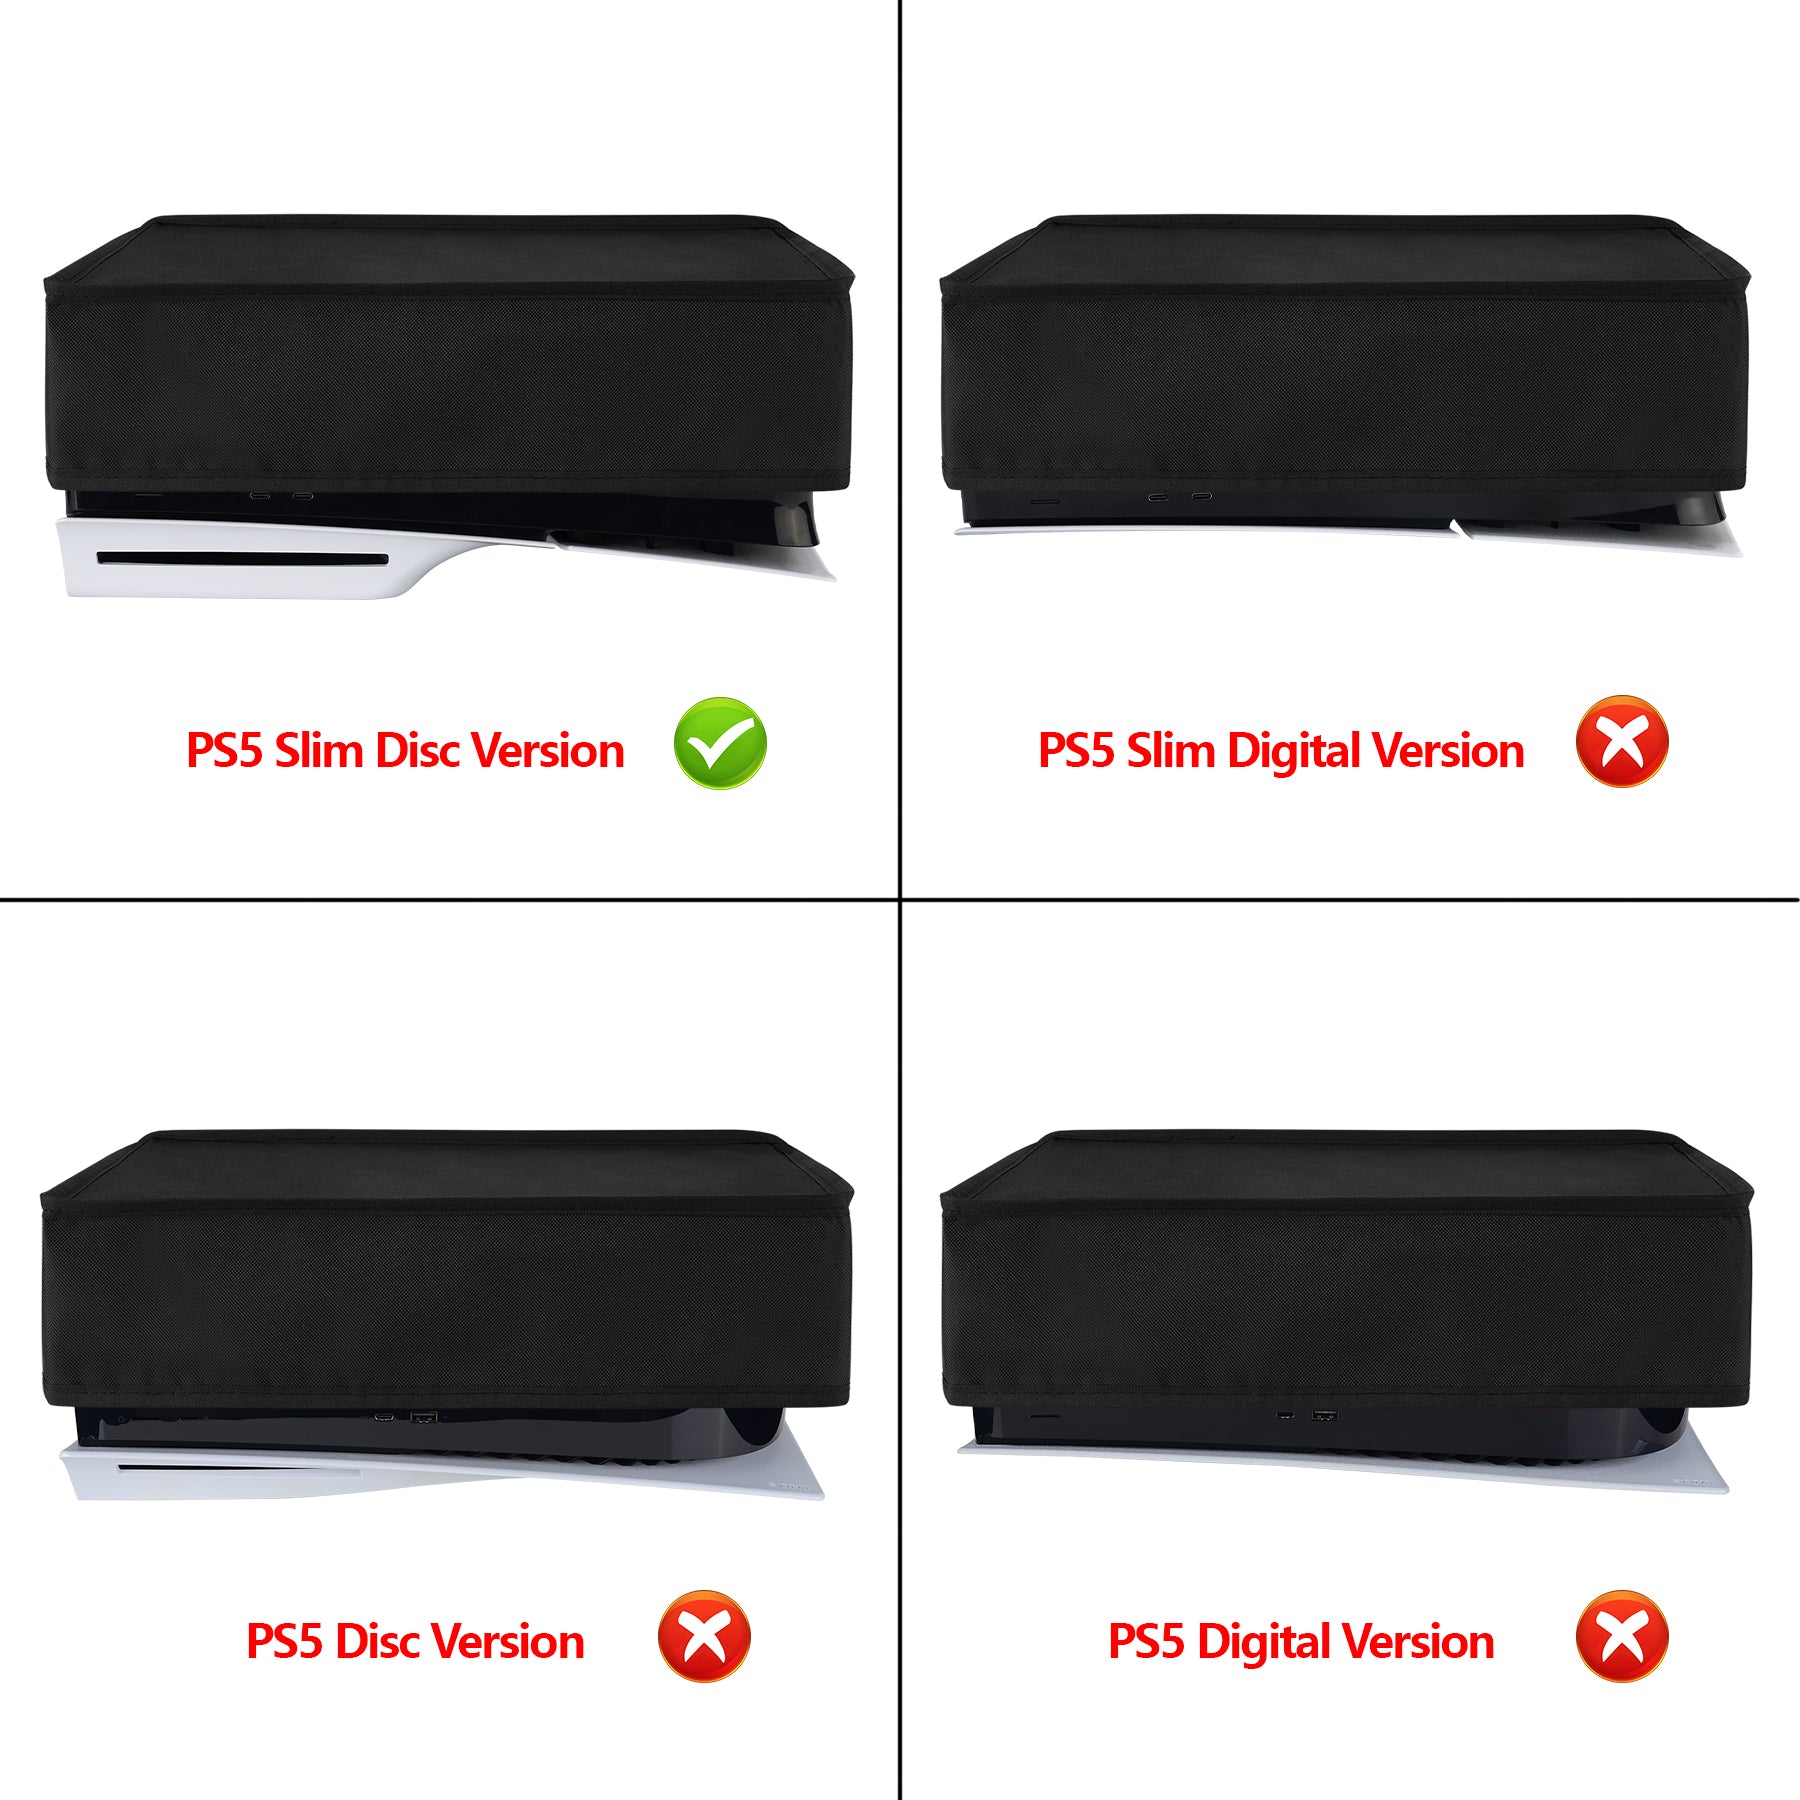 PlayVital Horizontal Dust Cover for ps5 Slim Disc Edition(The New Smaller Design), Nylon Dust Proof Protector Waterproof Cover Sleeve for ps5 Slim Console - Black - HUYPFM001 PlayVital